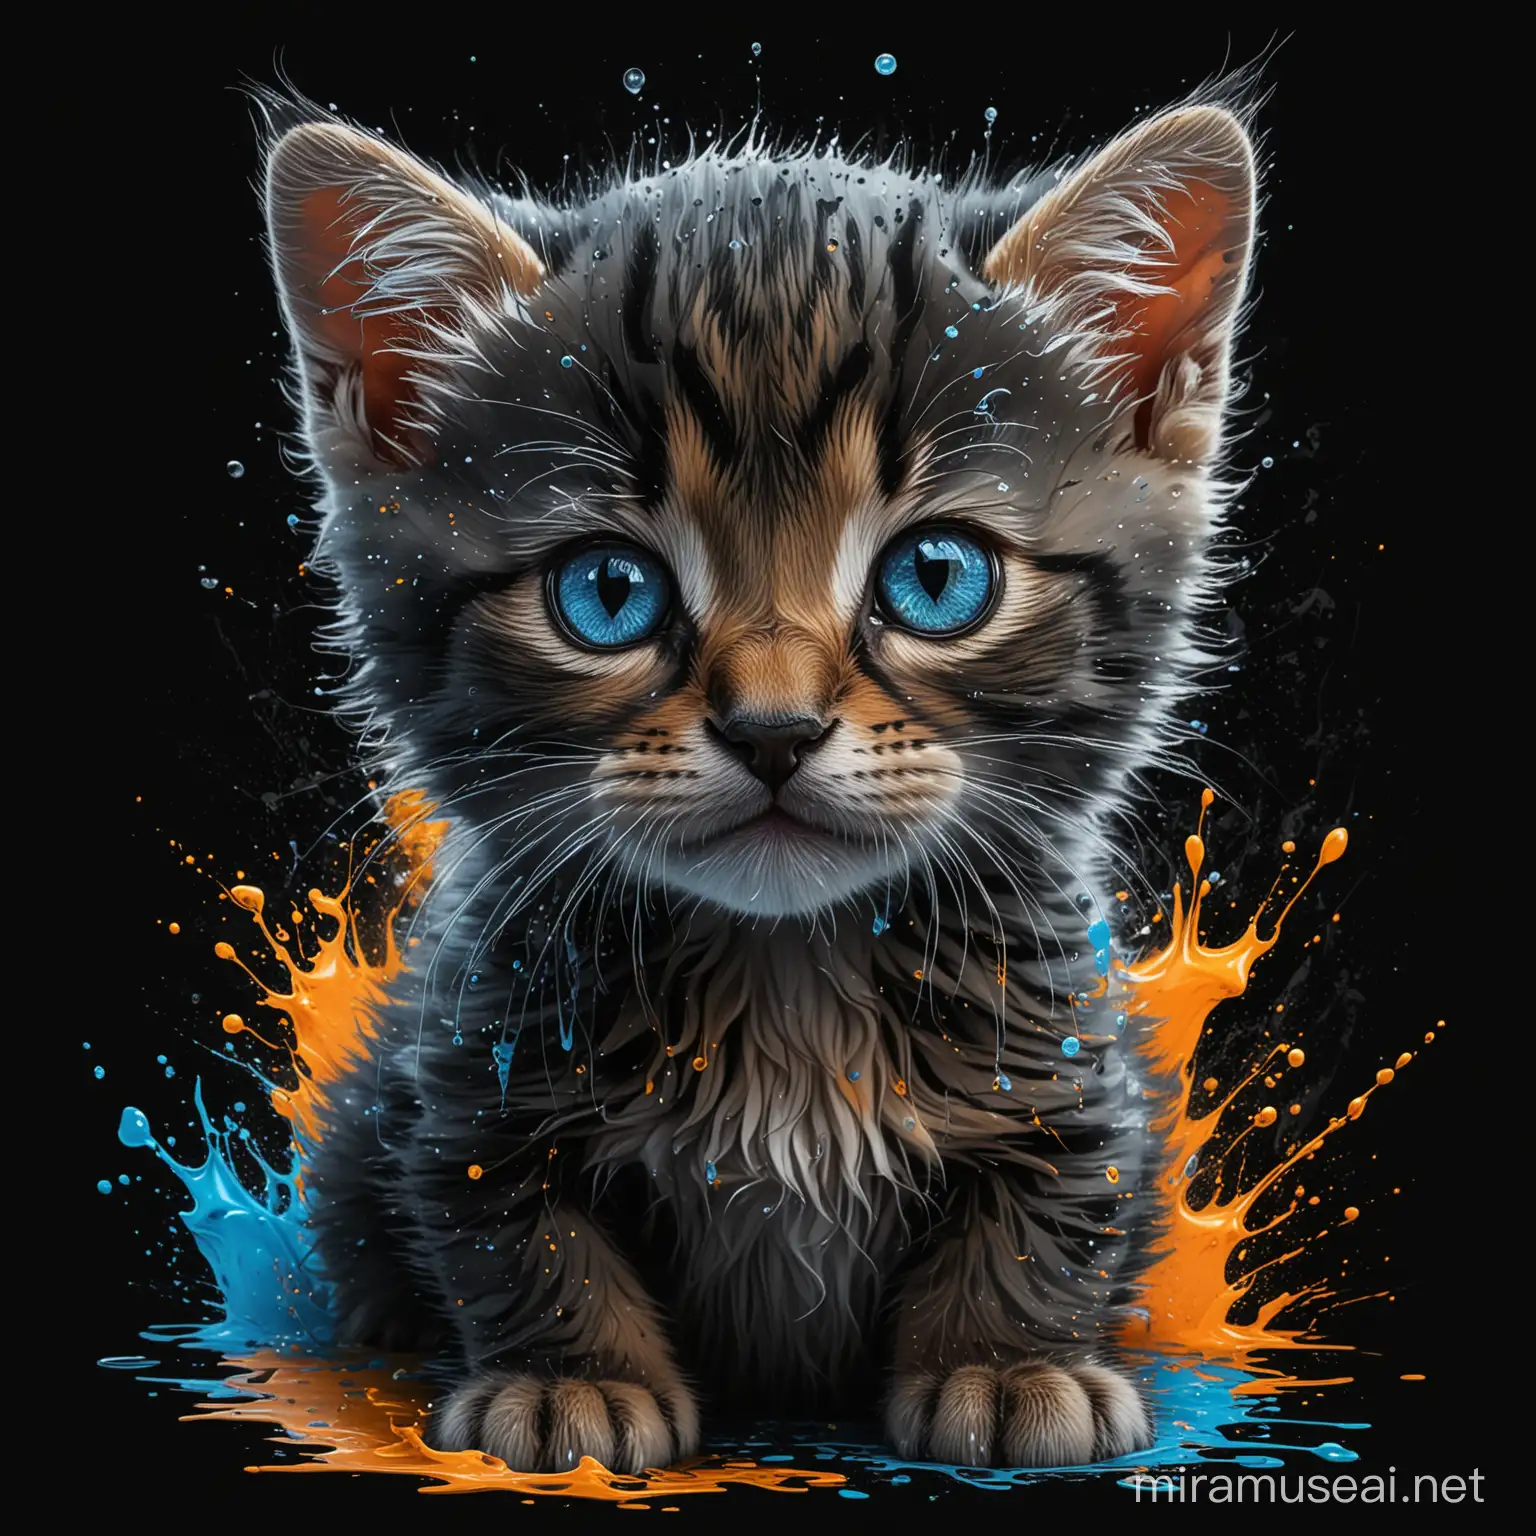 Adorable Kitten with Hyperdetailed Features in a Color Splash TeeShirt Design